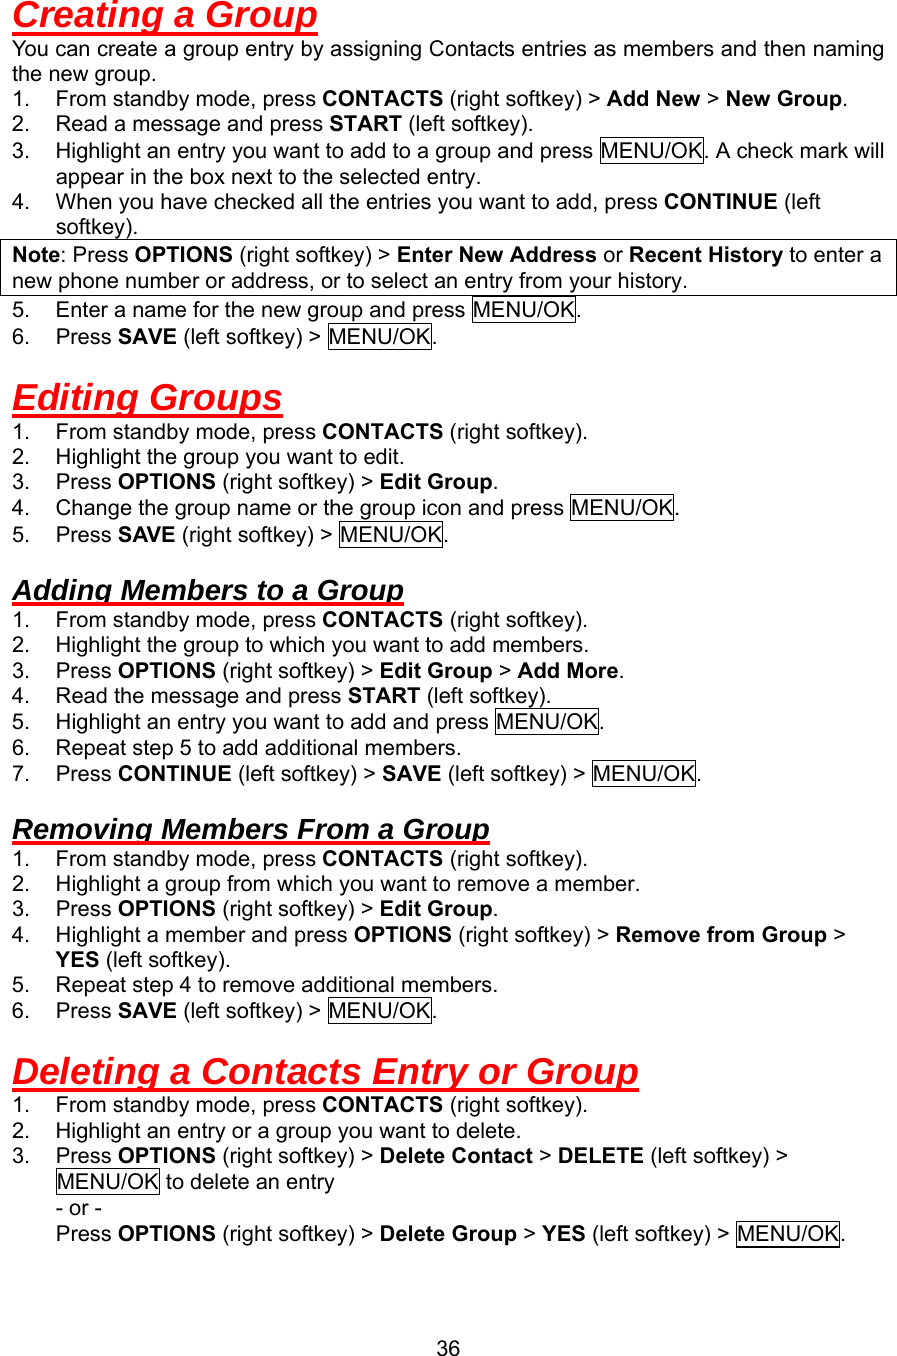 Creating a Group You can create a group entry by assigning Contacts entries as members and then naming the new group. 1.  From standby mode, press CONTACTS (right softkey) &gt; Add New &gt; New Group. 2.  Read a message and press START (left softkey). 3.  Highlight an entry you want to add to a group and press MENU/OK. A check mark will appear in the box next to the selected entry. 4.  When you have checked all the entries you want to add, press CONTINUE (left softkey). Note: Press OPTIONS (right softkey) &gt; Enter New Address or Recent History to enter a new phone number or address, or to select an entry from your history. 5.  Enter a name for the new group and press MENU/OK. 6. Press SAVE (left softkey) &gt; MENU/OK.  Editing Groups 1.  From standby mode, press CONTACTS (right softkey). 2.  Highlight the group you want to edit. 3. Press OPTIONS (right softkey) &gt; Edit Group. 4.  Change the group name or the group icon and press MENU/OK. 5. Press SAVE (right softkey) &gt; MENU/OK.  Adding Members to a Group 1.  From standby mode, press CONTACTS (right softkey). 2.  Highlight the group to which you want to add members. 3. Press OPTIONS (right softkey) &gt; Edit Group &gt; Add More. 4.  Read the message and press START (left softkey). 5.  Highlight an entry you want to add and press MENU/OK. 6.  Repeat step 5 to add additional members. 7. Press CONTINUE (left softkey) &gt; SAVE (left softkey) &gt; MENU/OK.  Removing Members From a Group 1.  From standby mode, press CONTACTS (right softkey). 2.  Highlight a group from which you want to remove a member. 3. Press OPTIONS (right softkey) &gt; Edit Group. 4.  Highlight a member and press OPTIONS (right softkey) &gt; Remove from Group &gt; YES (left softkey). 5.  Repeat step 4 to remove additional members. 6. Press SAVE (left softkey) &gt; MENU/OK.  Deleting a Contacts Entry or Group 1.  From standby mode, press CONTACTS (right softkey). 2.  Highlight an entry or a group you want to delete. 3. Press OPTIONS (right softkey) &gt; Delete Contact &gt; DELETE (left softkey) &gt; MENU/OK to delete an entry - or -     Press OPTIONS (right softkey) &gt; Delete Group &gt; YES (left softkey) &gt; MENU/OK.  36